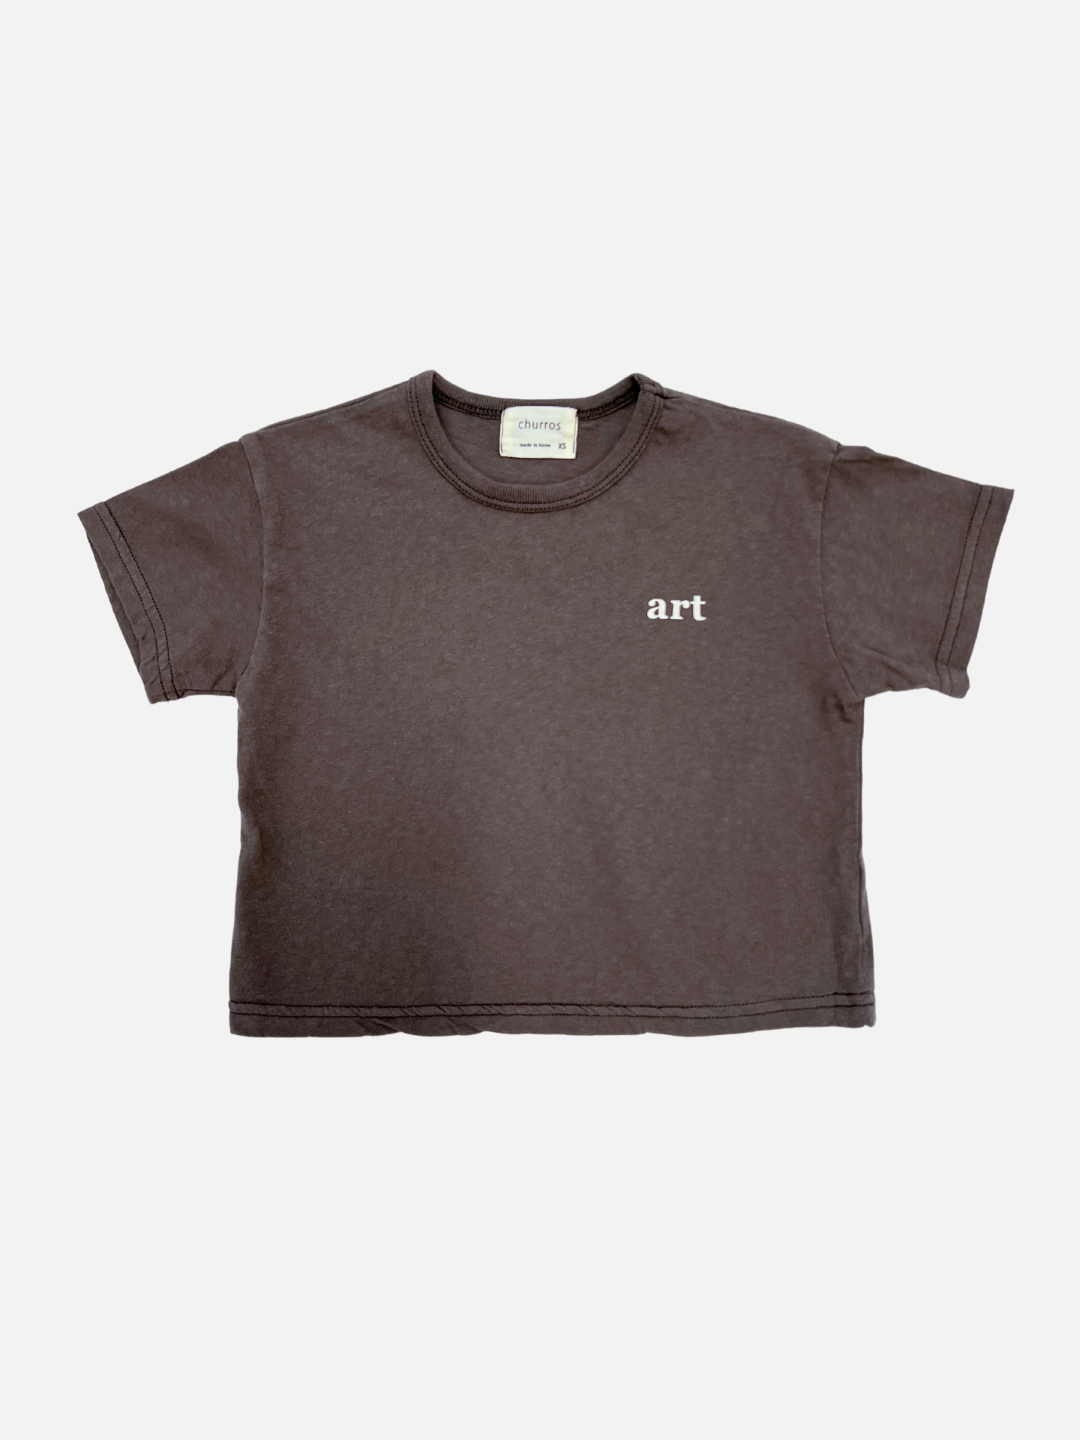 Front view of the kid's Studio tee in charcoal, with the words "art" printed on the right side